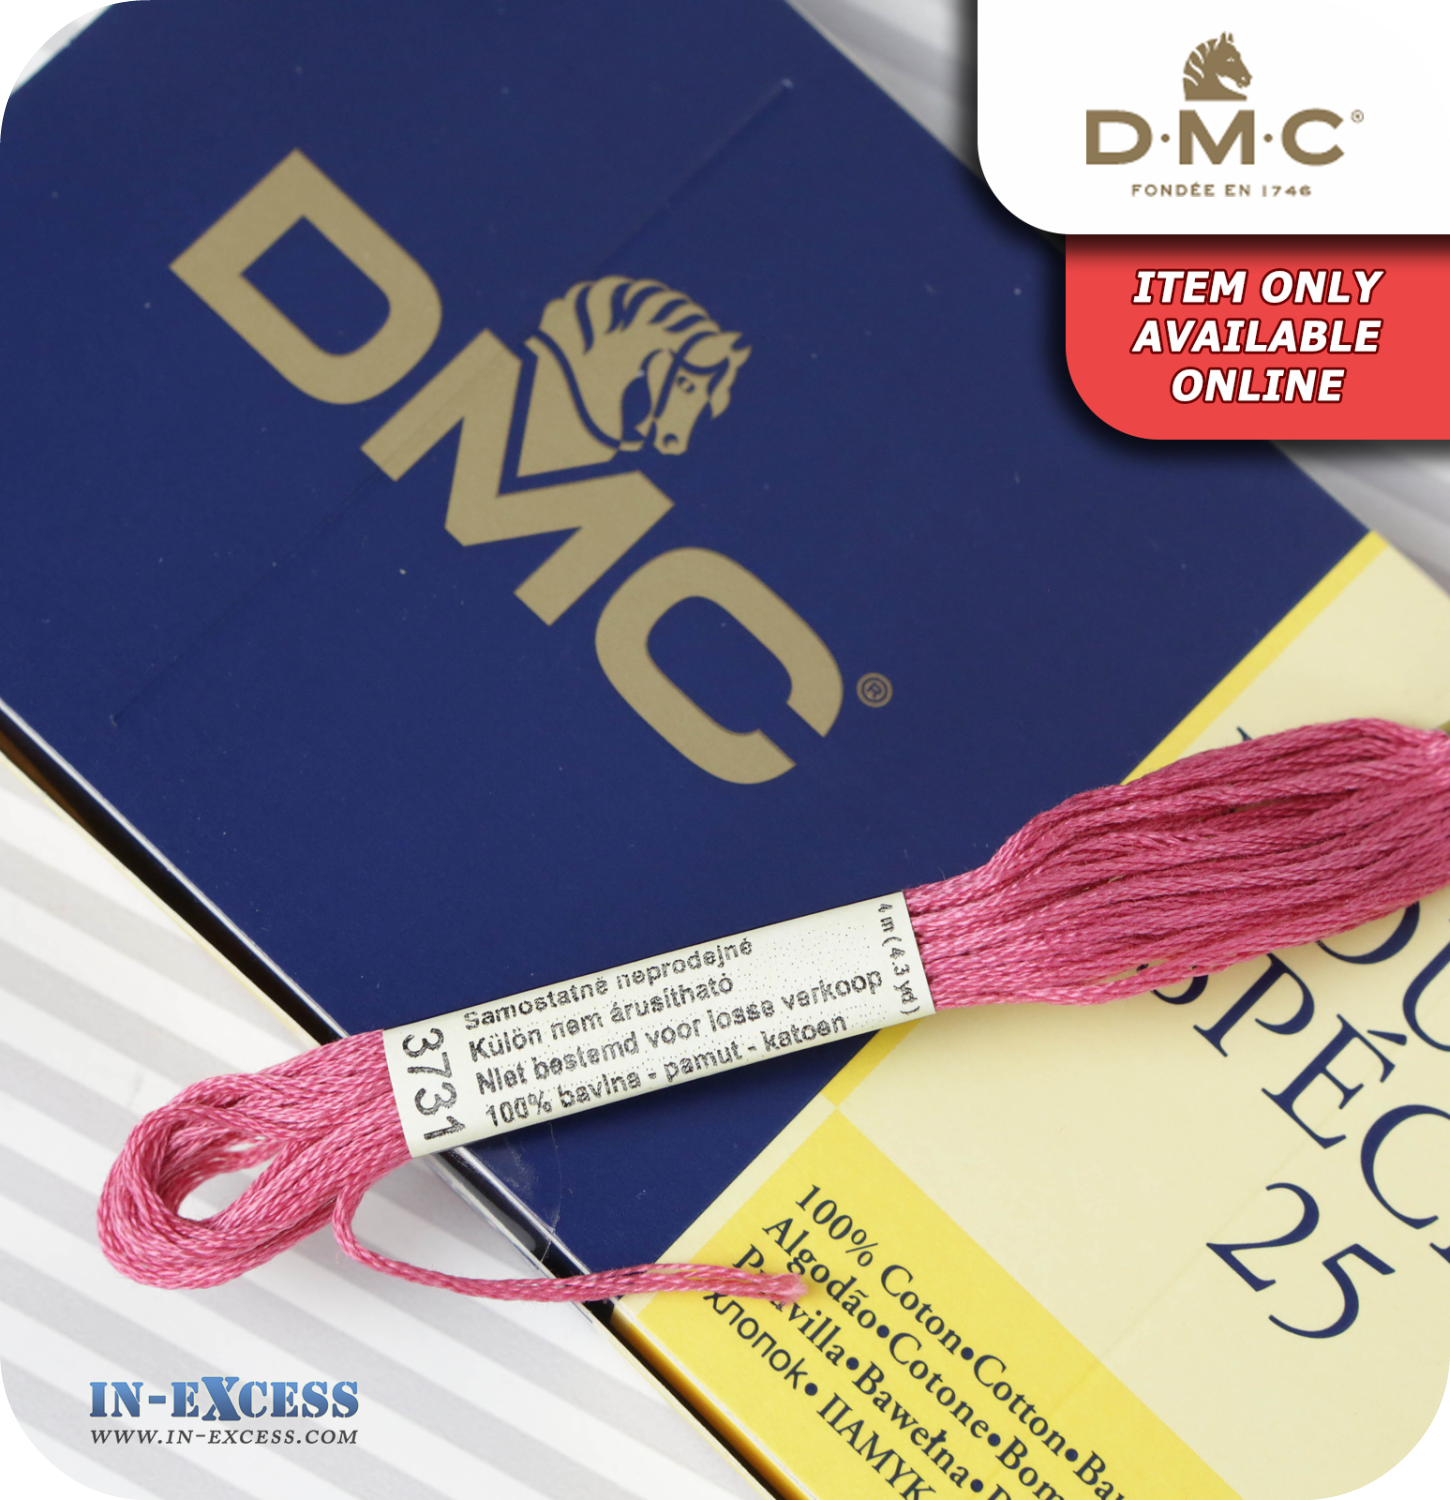 DMC Mouliné Special 25 Cotton Thread - Pack of 16 Skeins (3731 Dusty Rose)